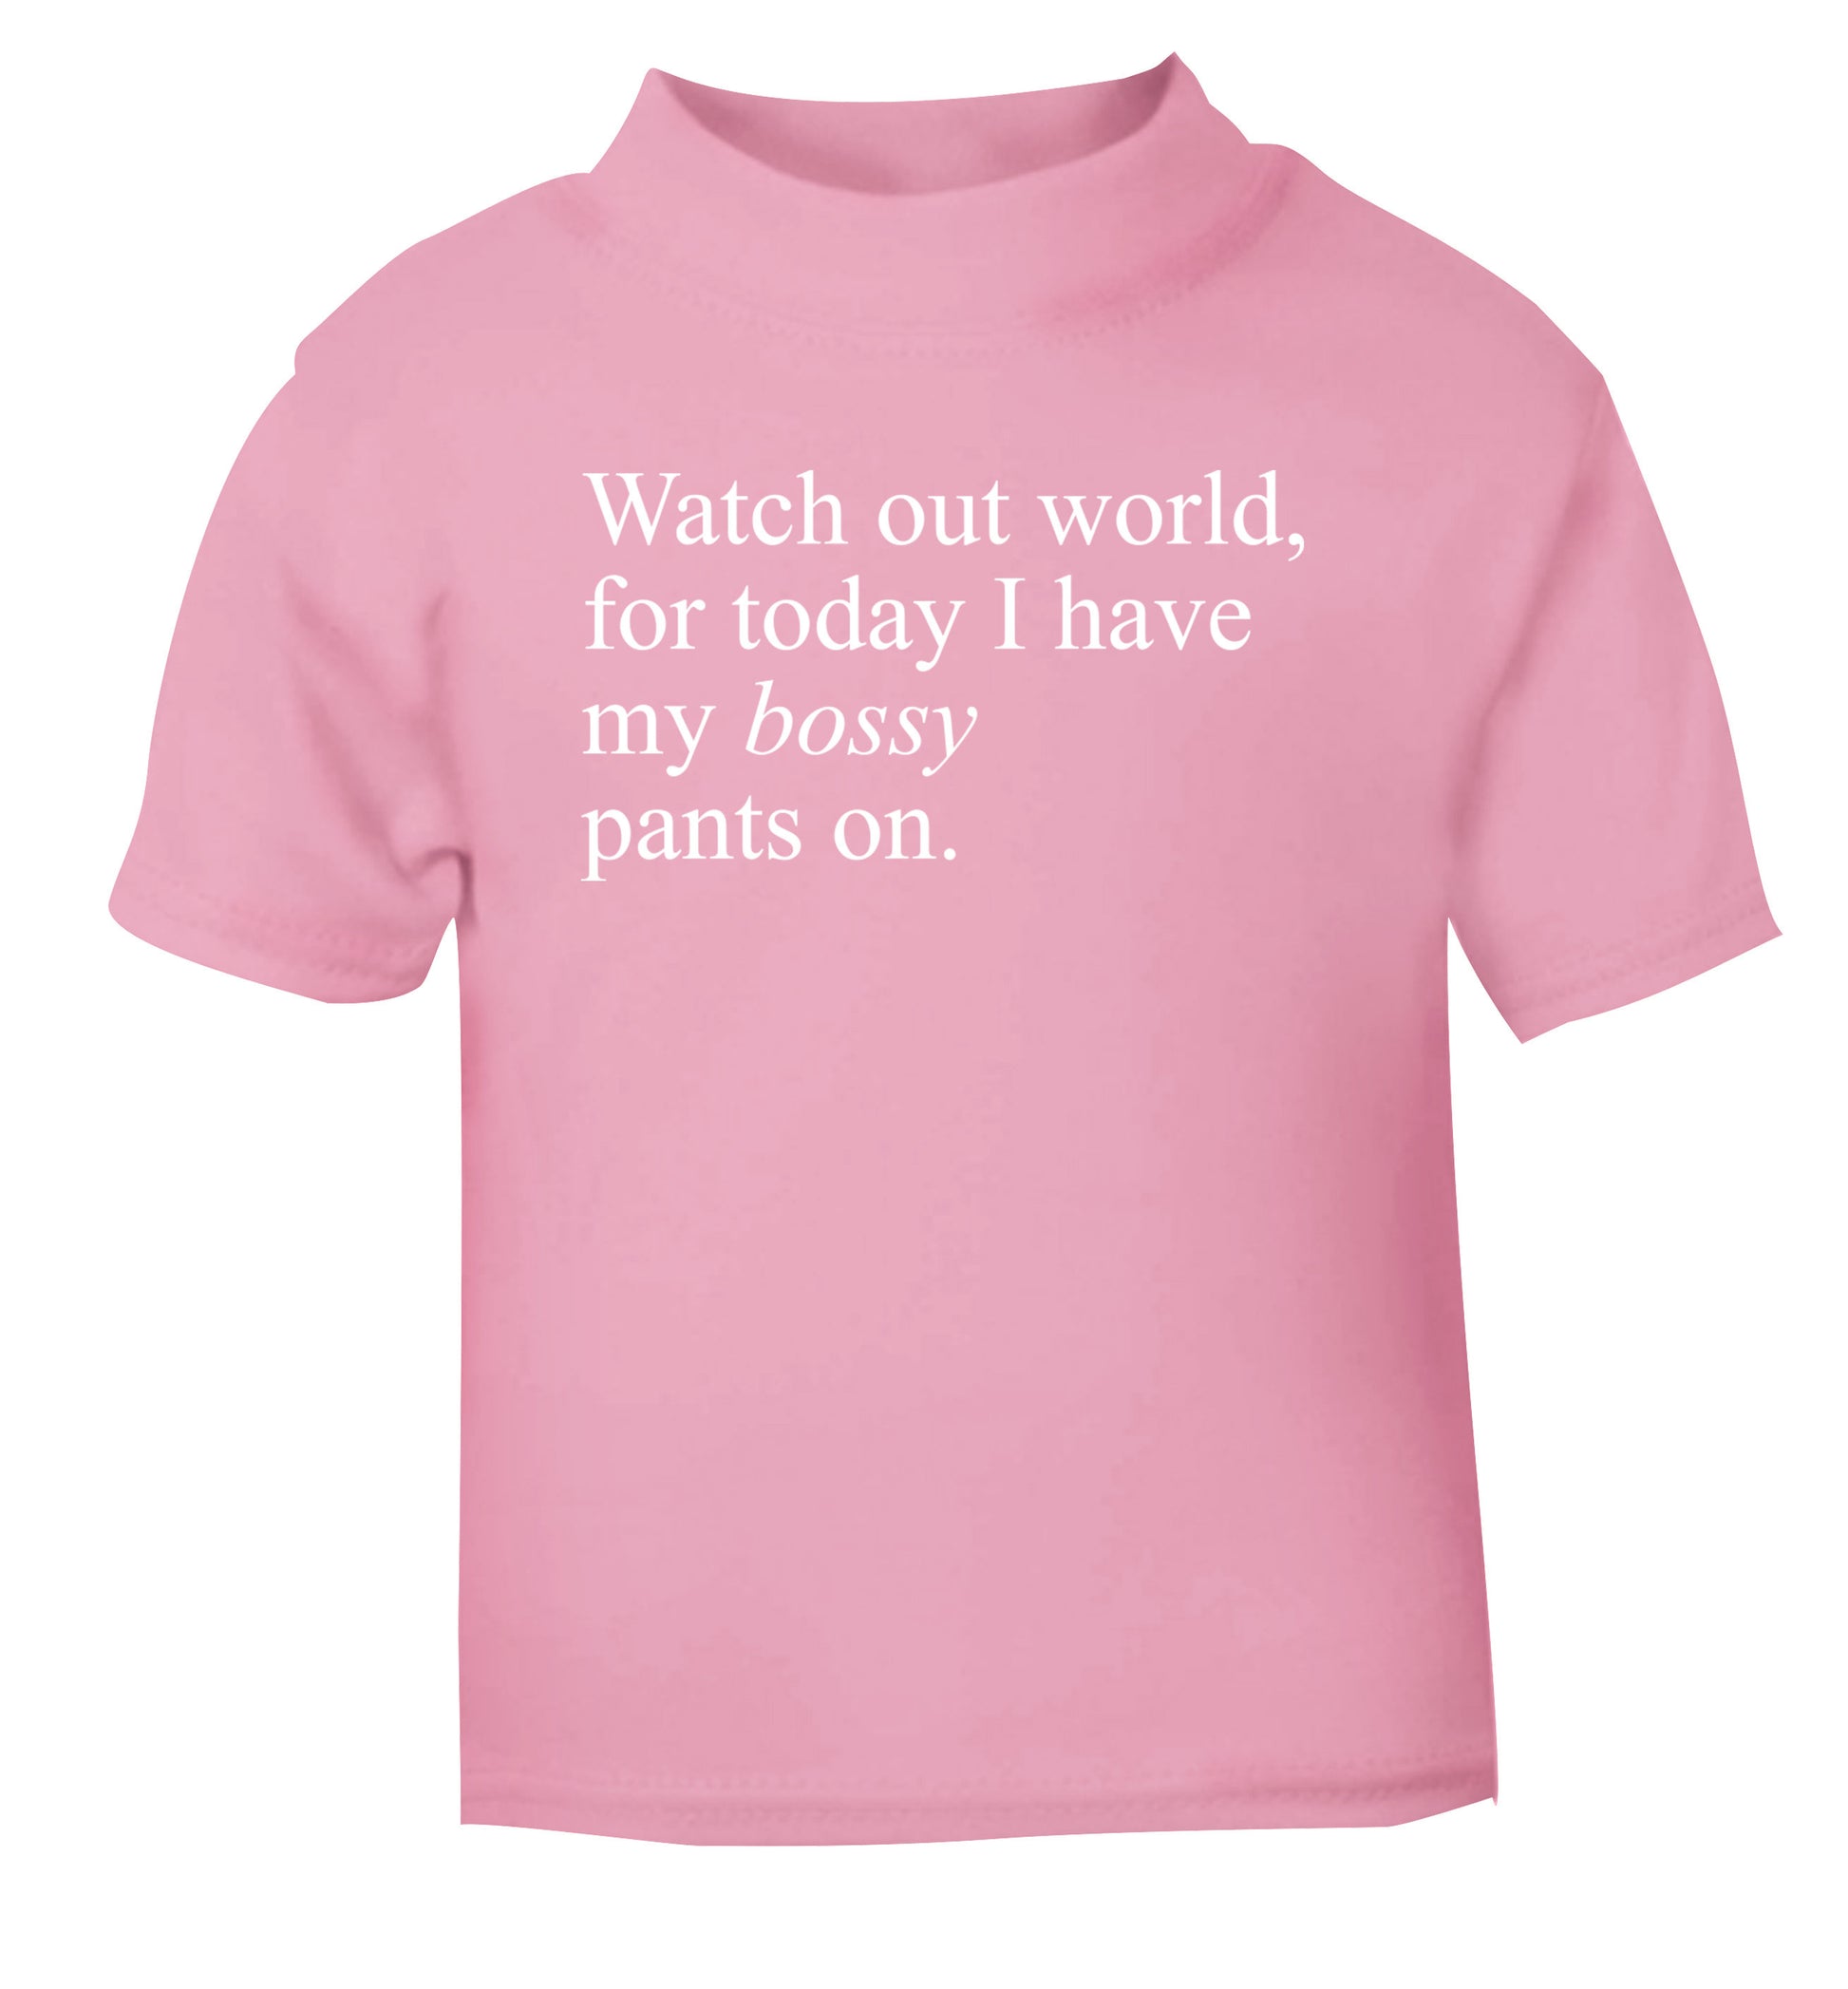 Watch out world, for today I have my bossy pants on light pink Baby Toddler Tshirt 2 Years